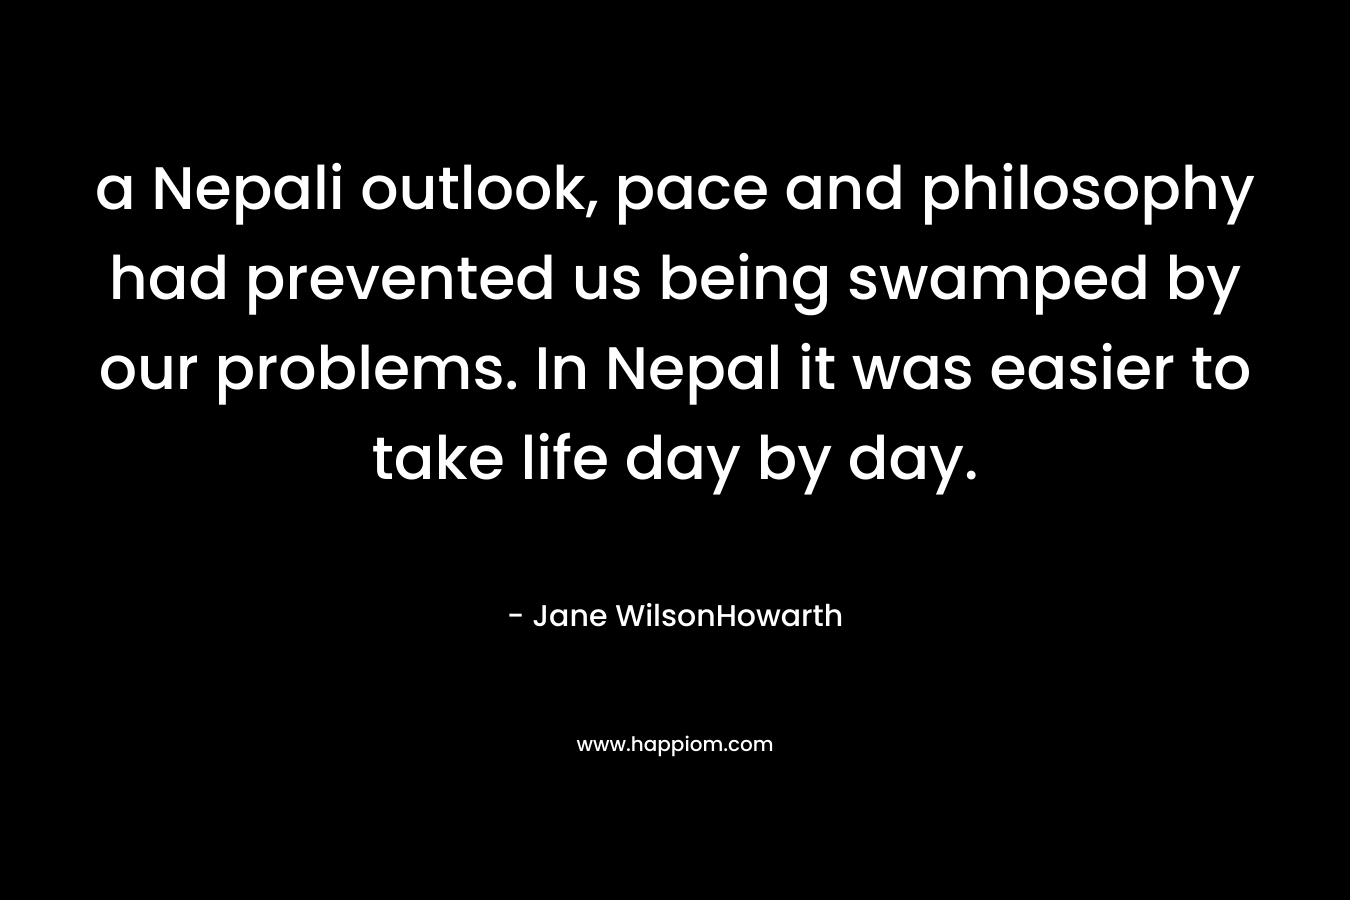 a Nepali outlook, pace and philosophy had prevented us being swamped by our problems. In Nepal it was easier to take life day by day. – Jane WilsonHowarth